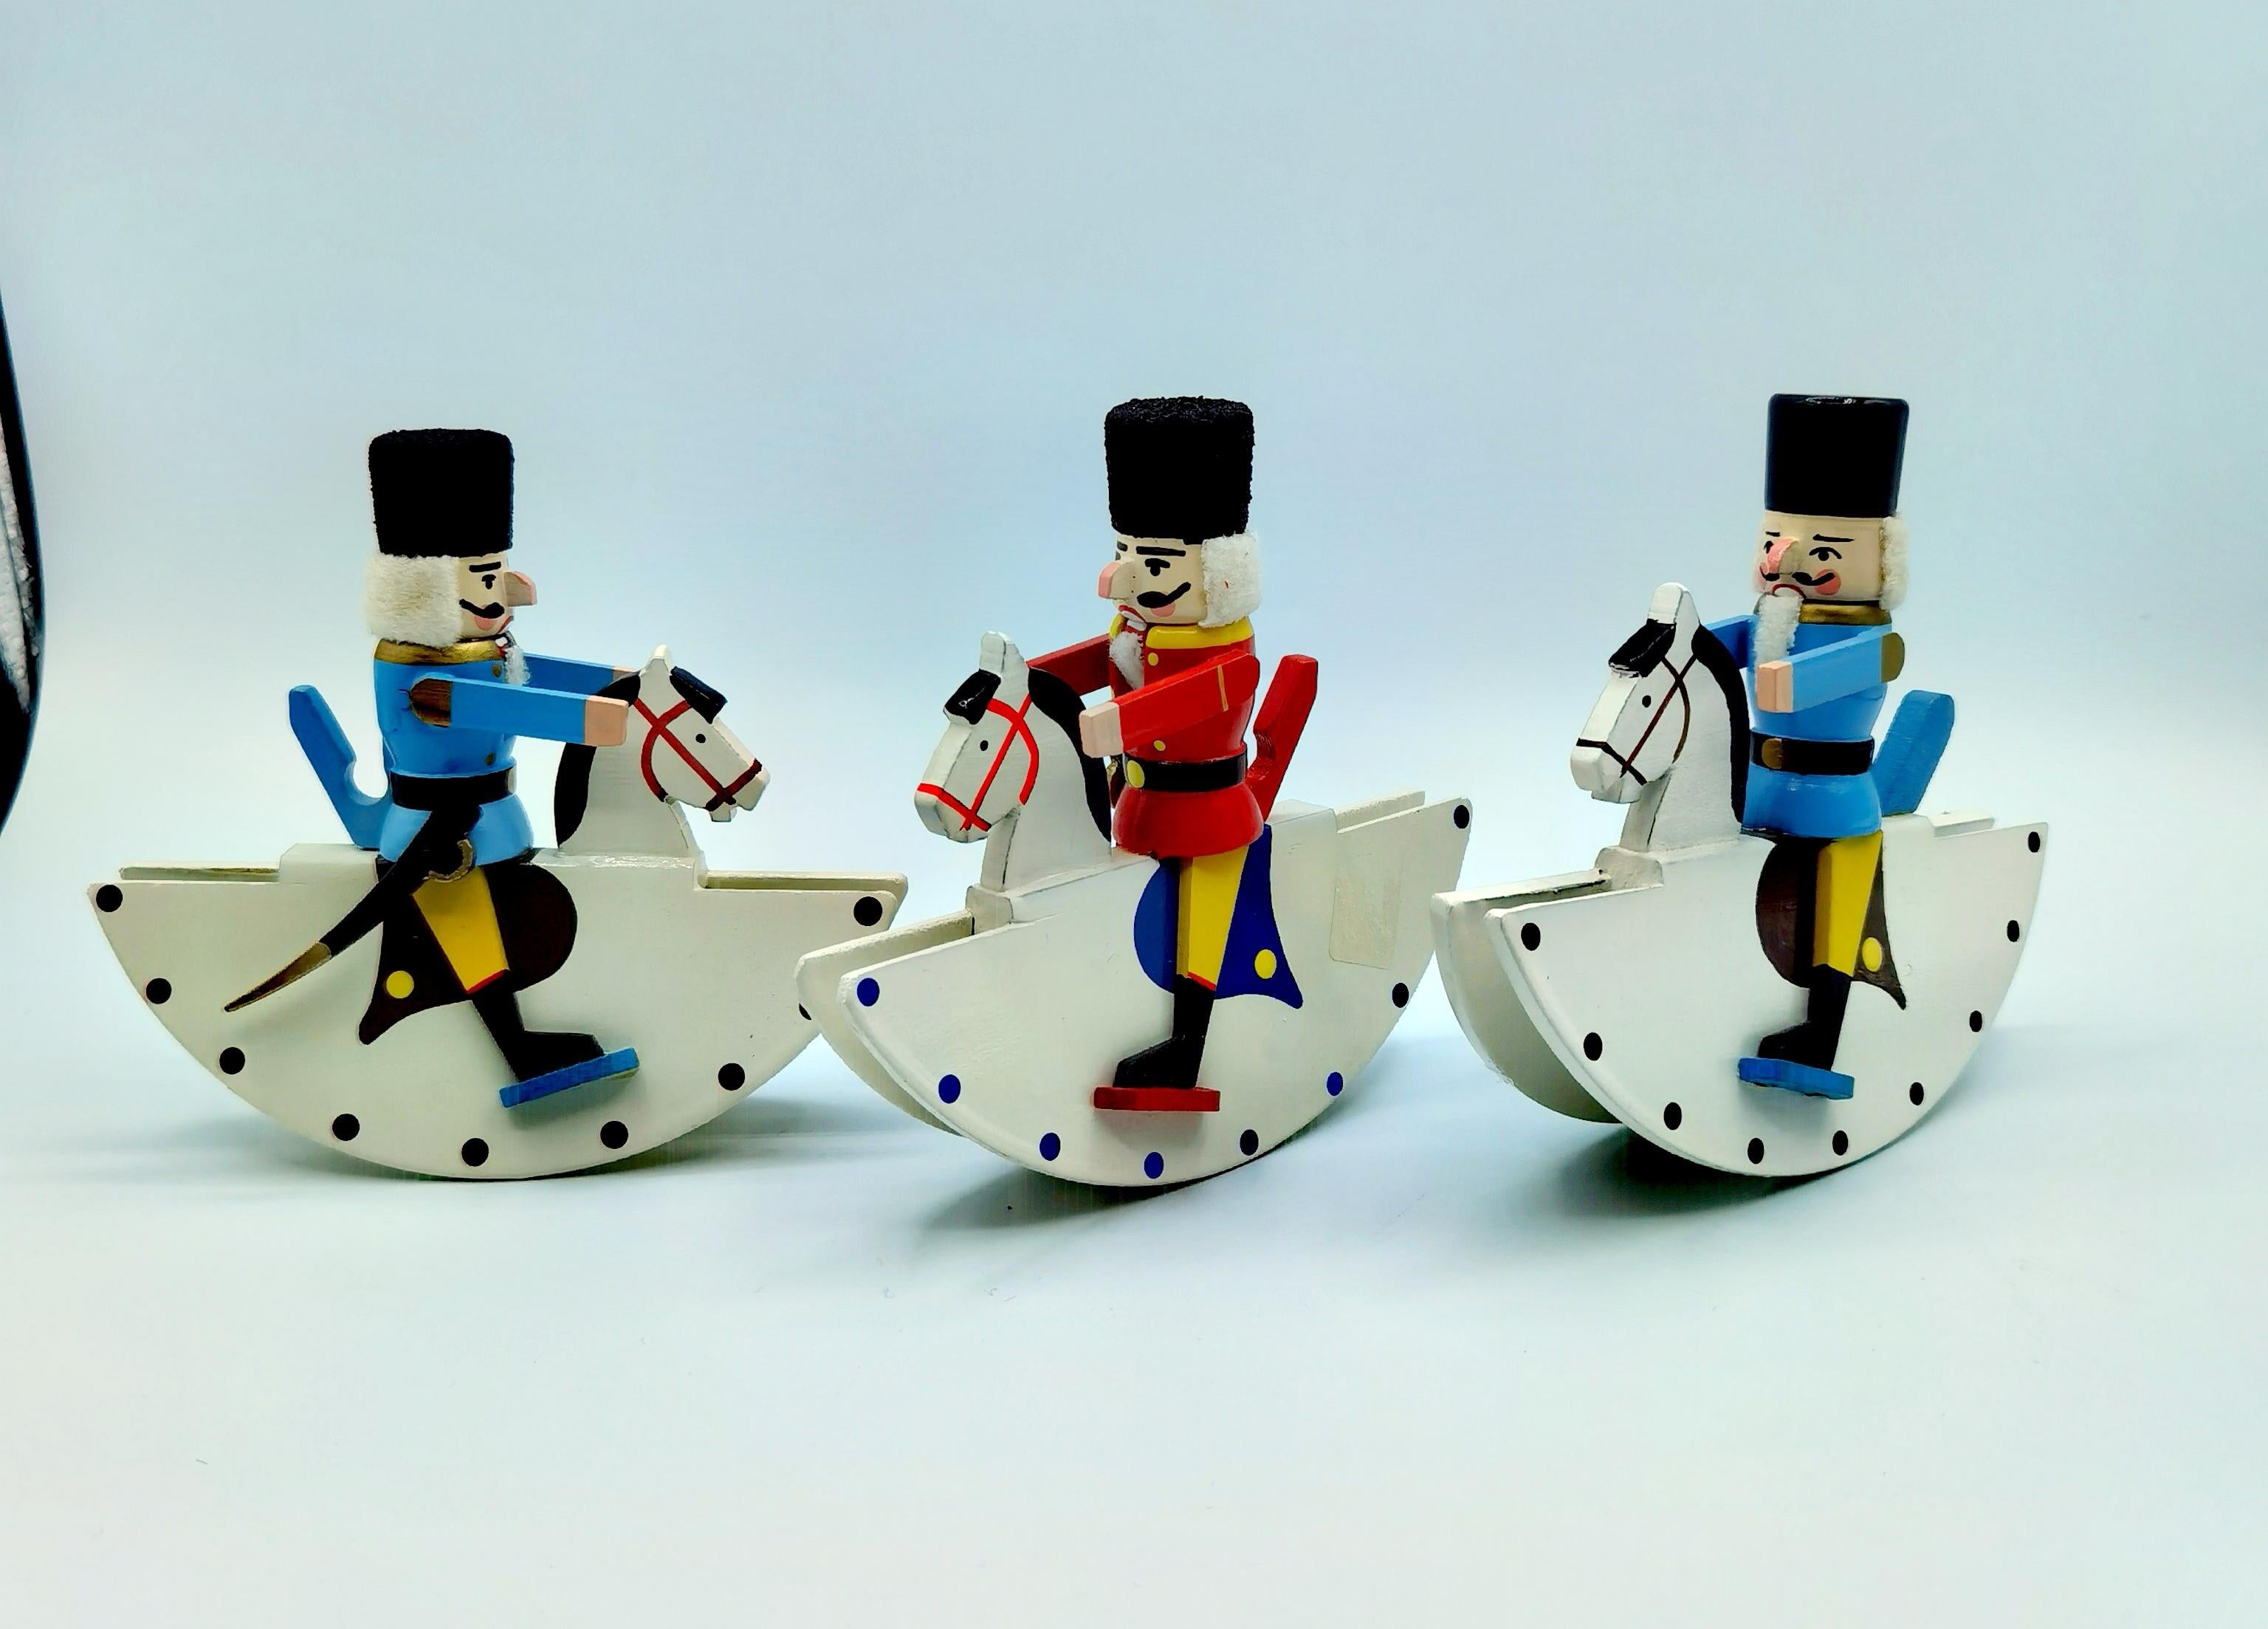 Set of three vintage German christmas nutkracker sculptures handmade in wood. Mid-20th century from the Erzgebirge. The traditional hand carved nutcrackers are hand painted in wood and sitting on a rocking horse. Stamped made in Germany.
A